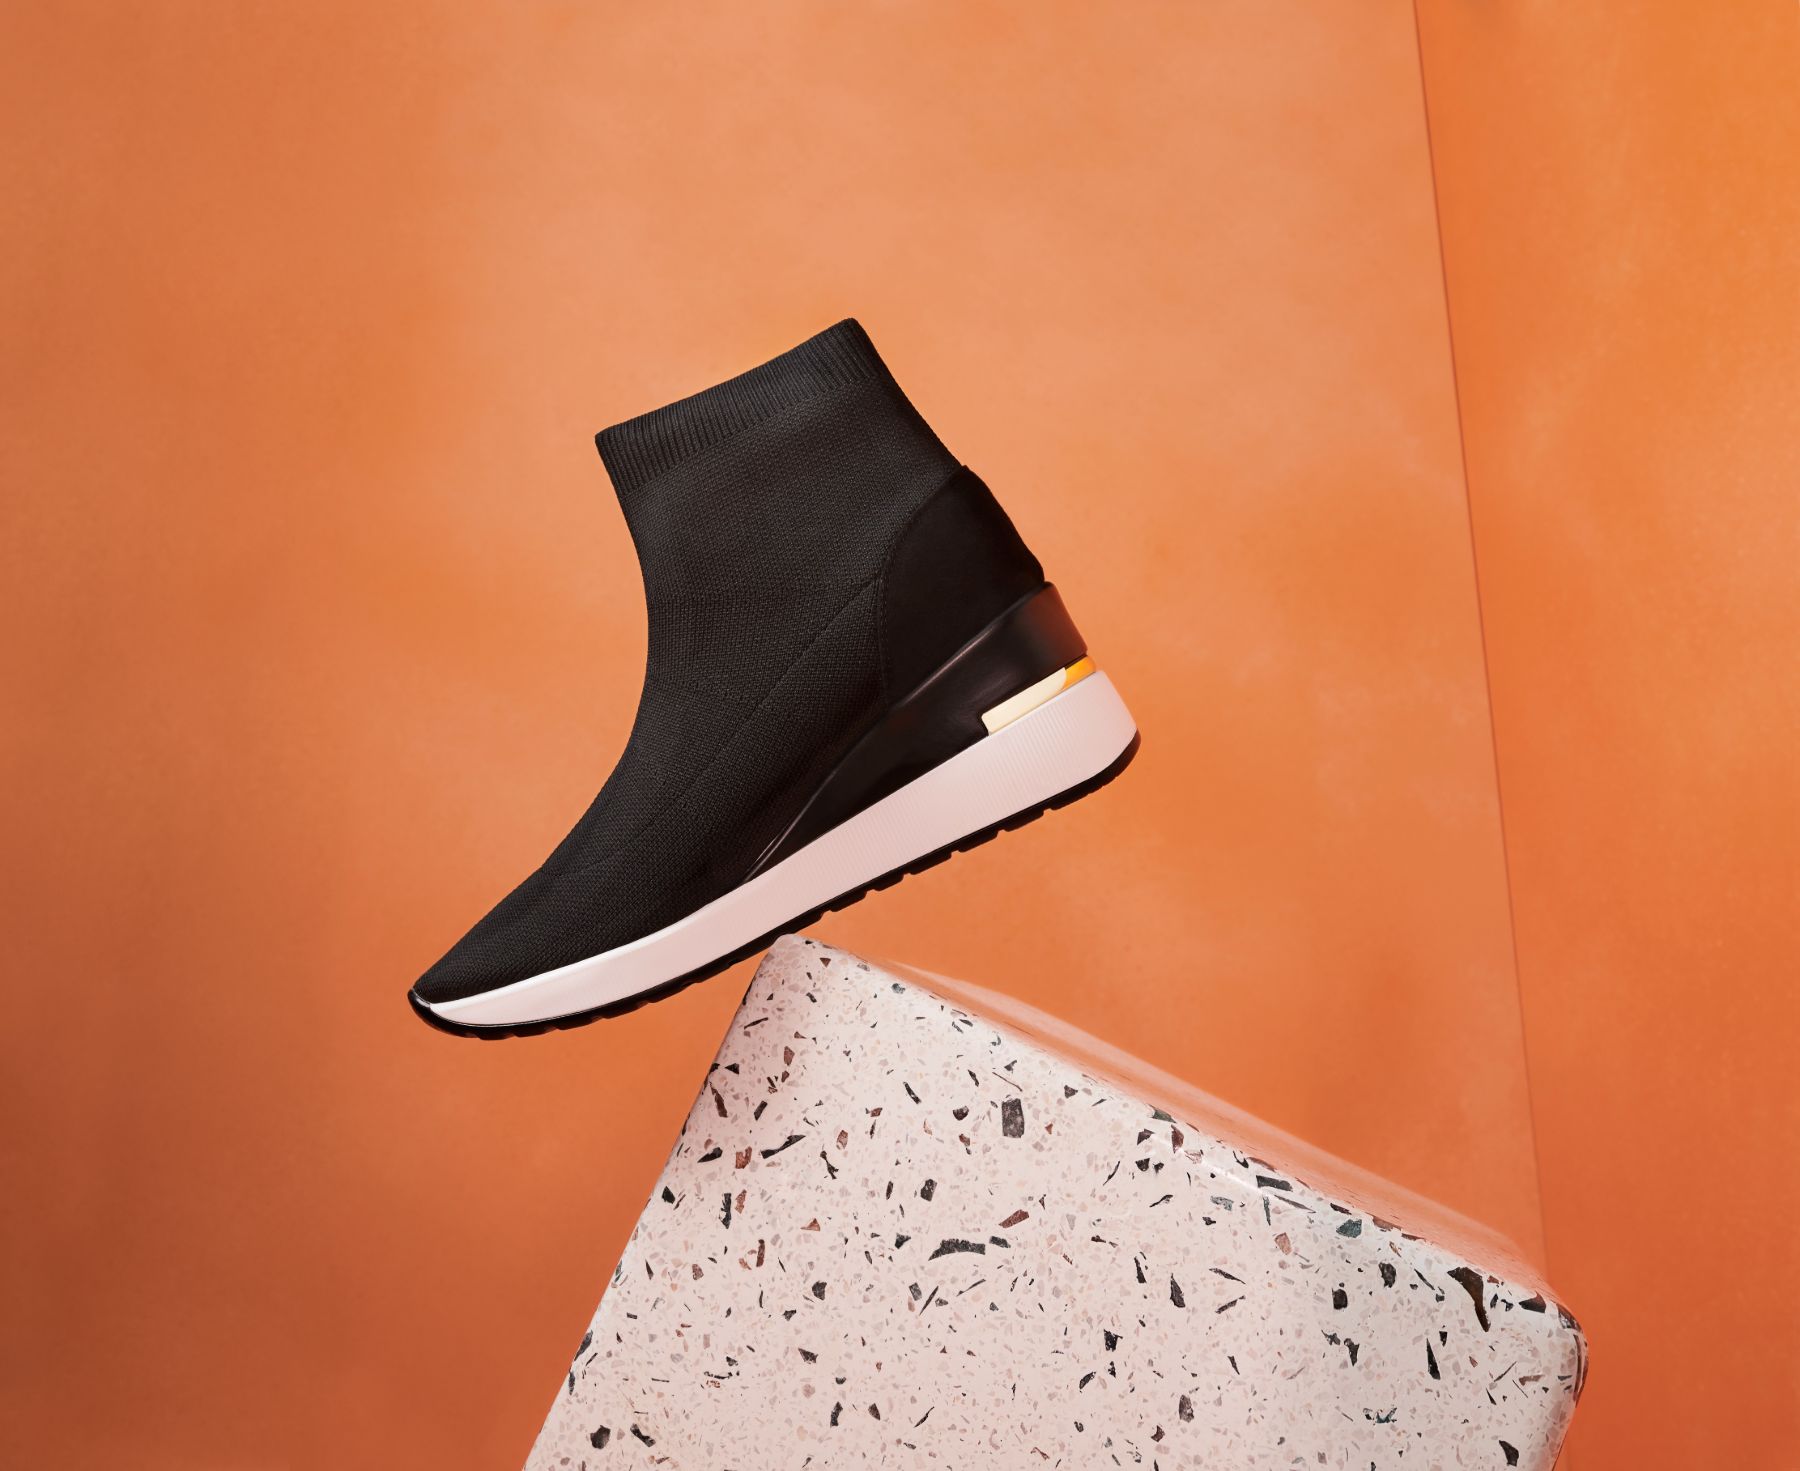 Footwear and Accessories by New Look